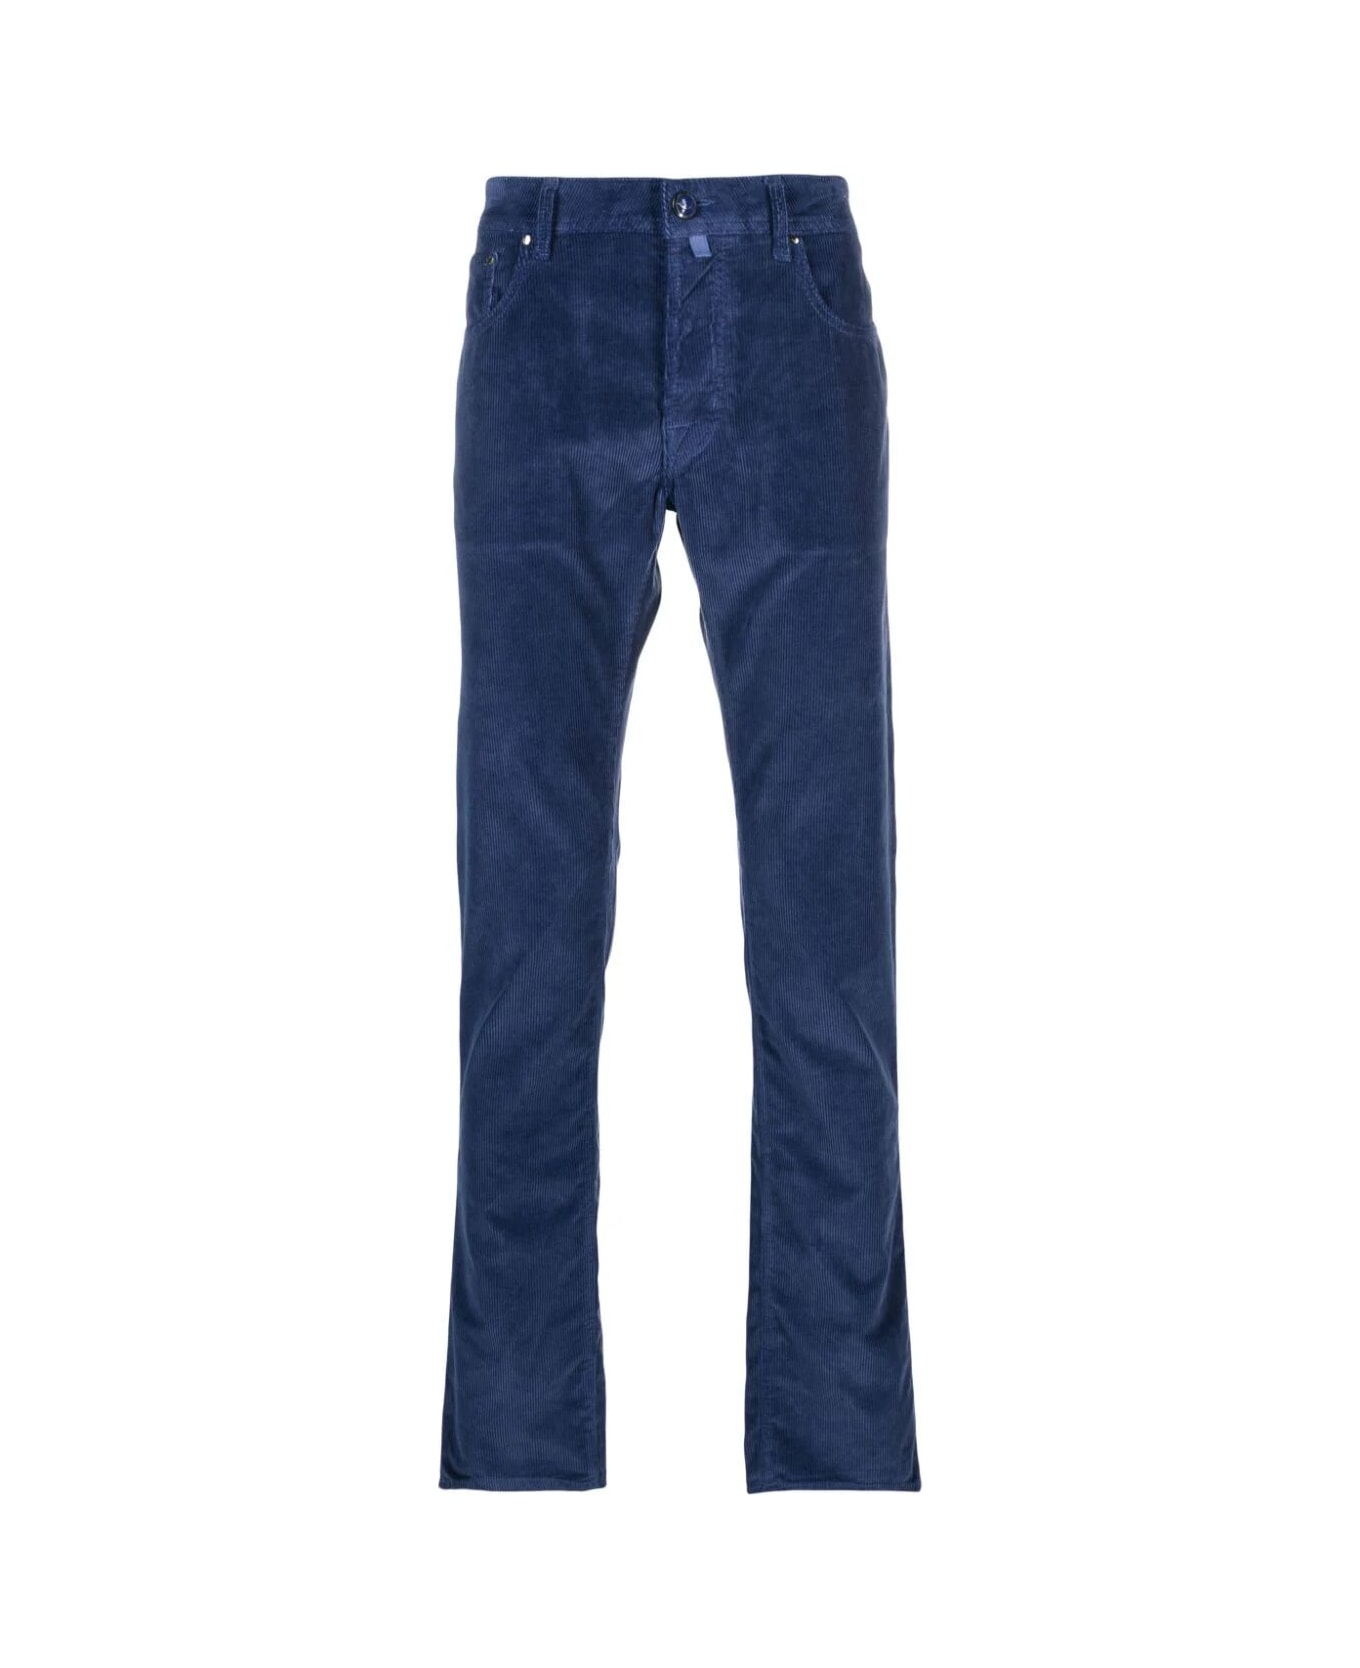 Jacob Cohen Bard Slim Fit Jeans - China Blue ボトムス